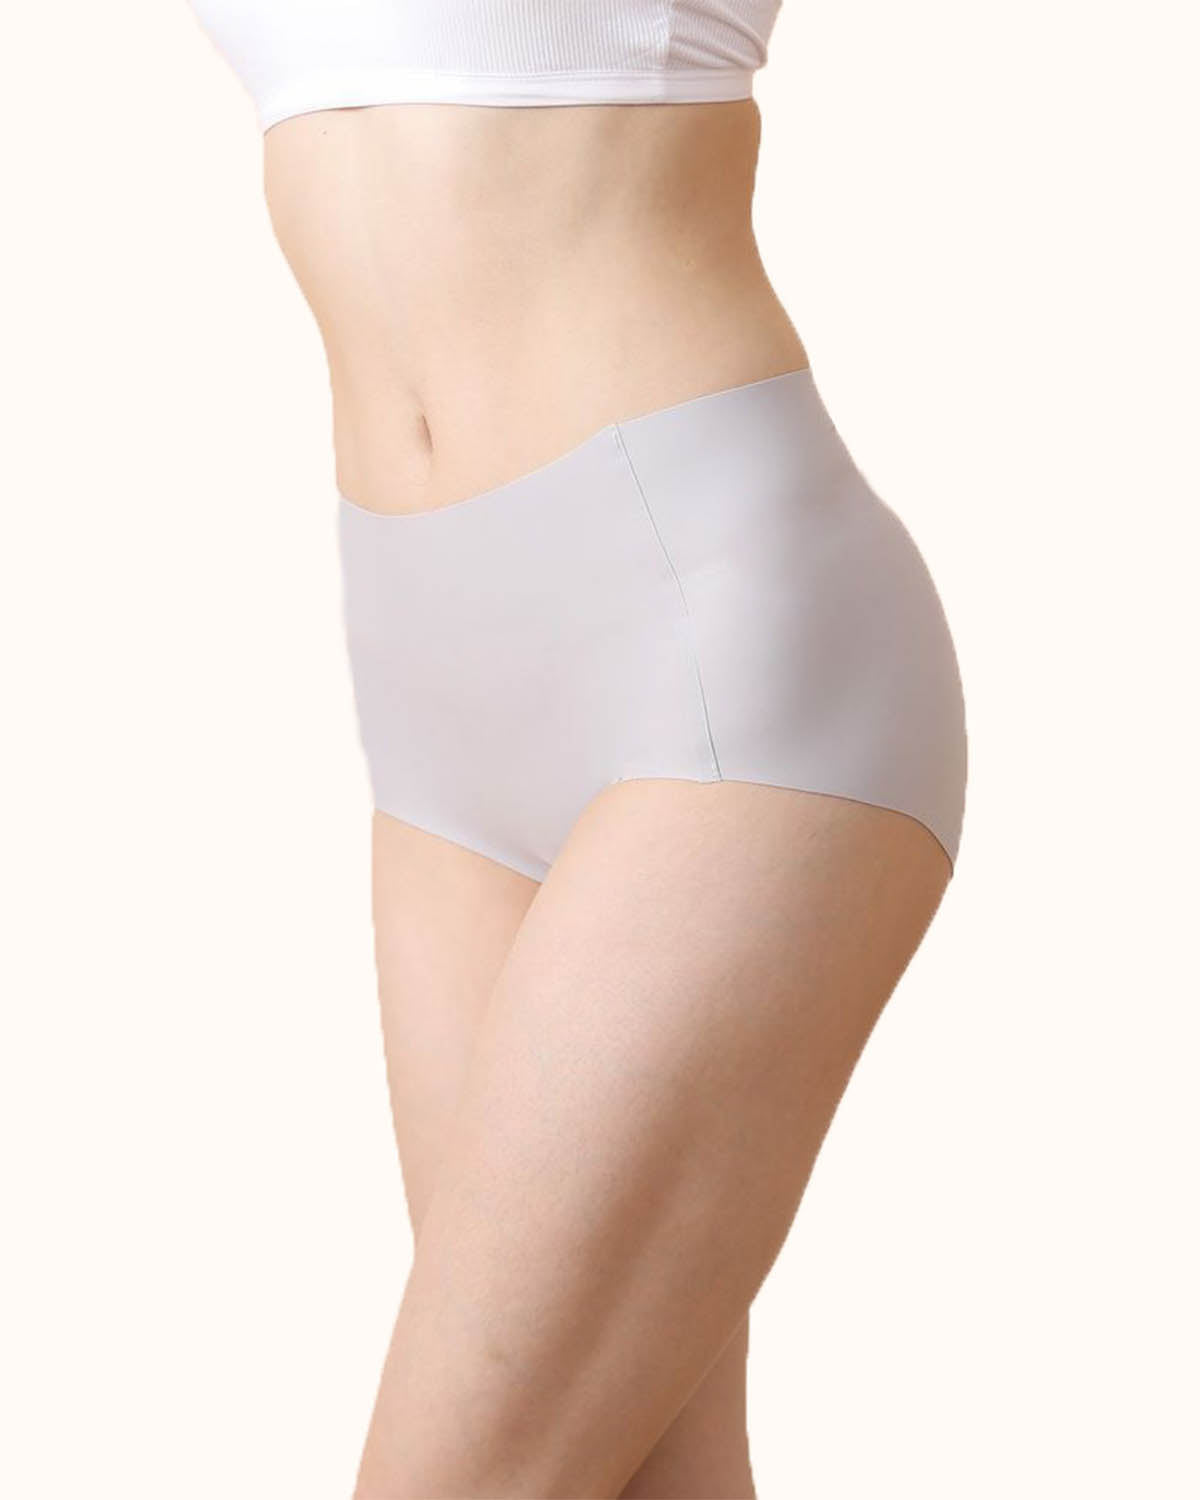 3 Pack of Womens Maxi Briefs (7001 White or Nude) High Waisted Panties  Underwear Knickers with support - Vedoneire